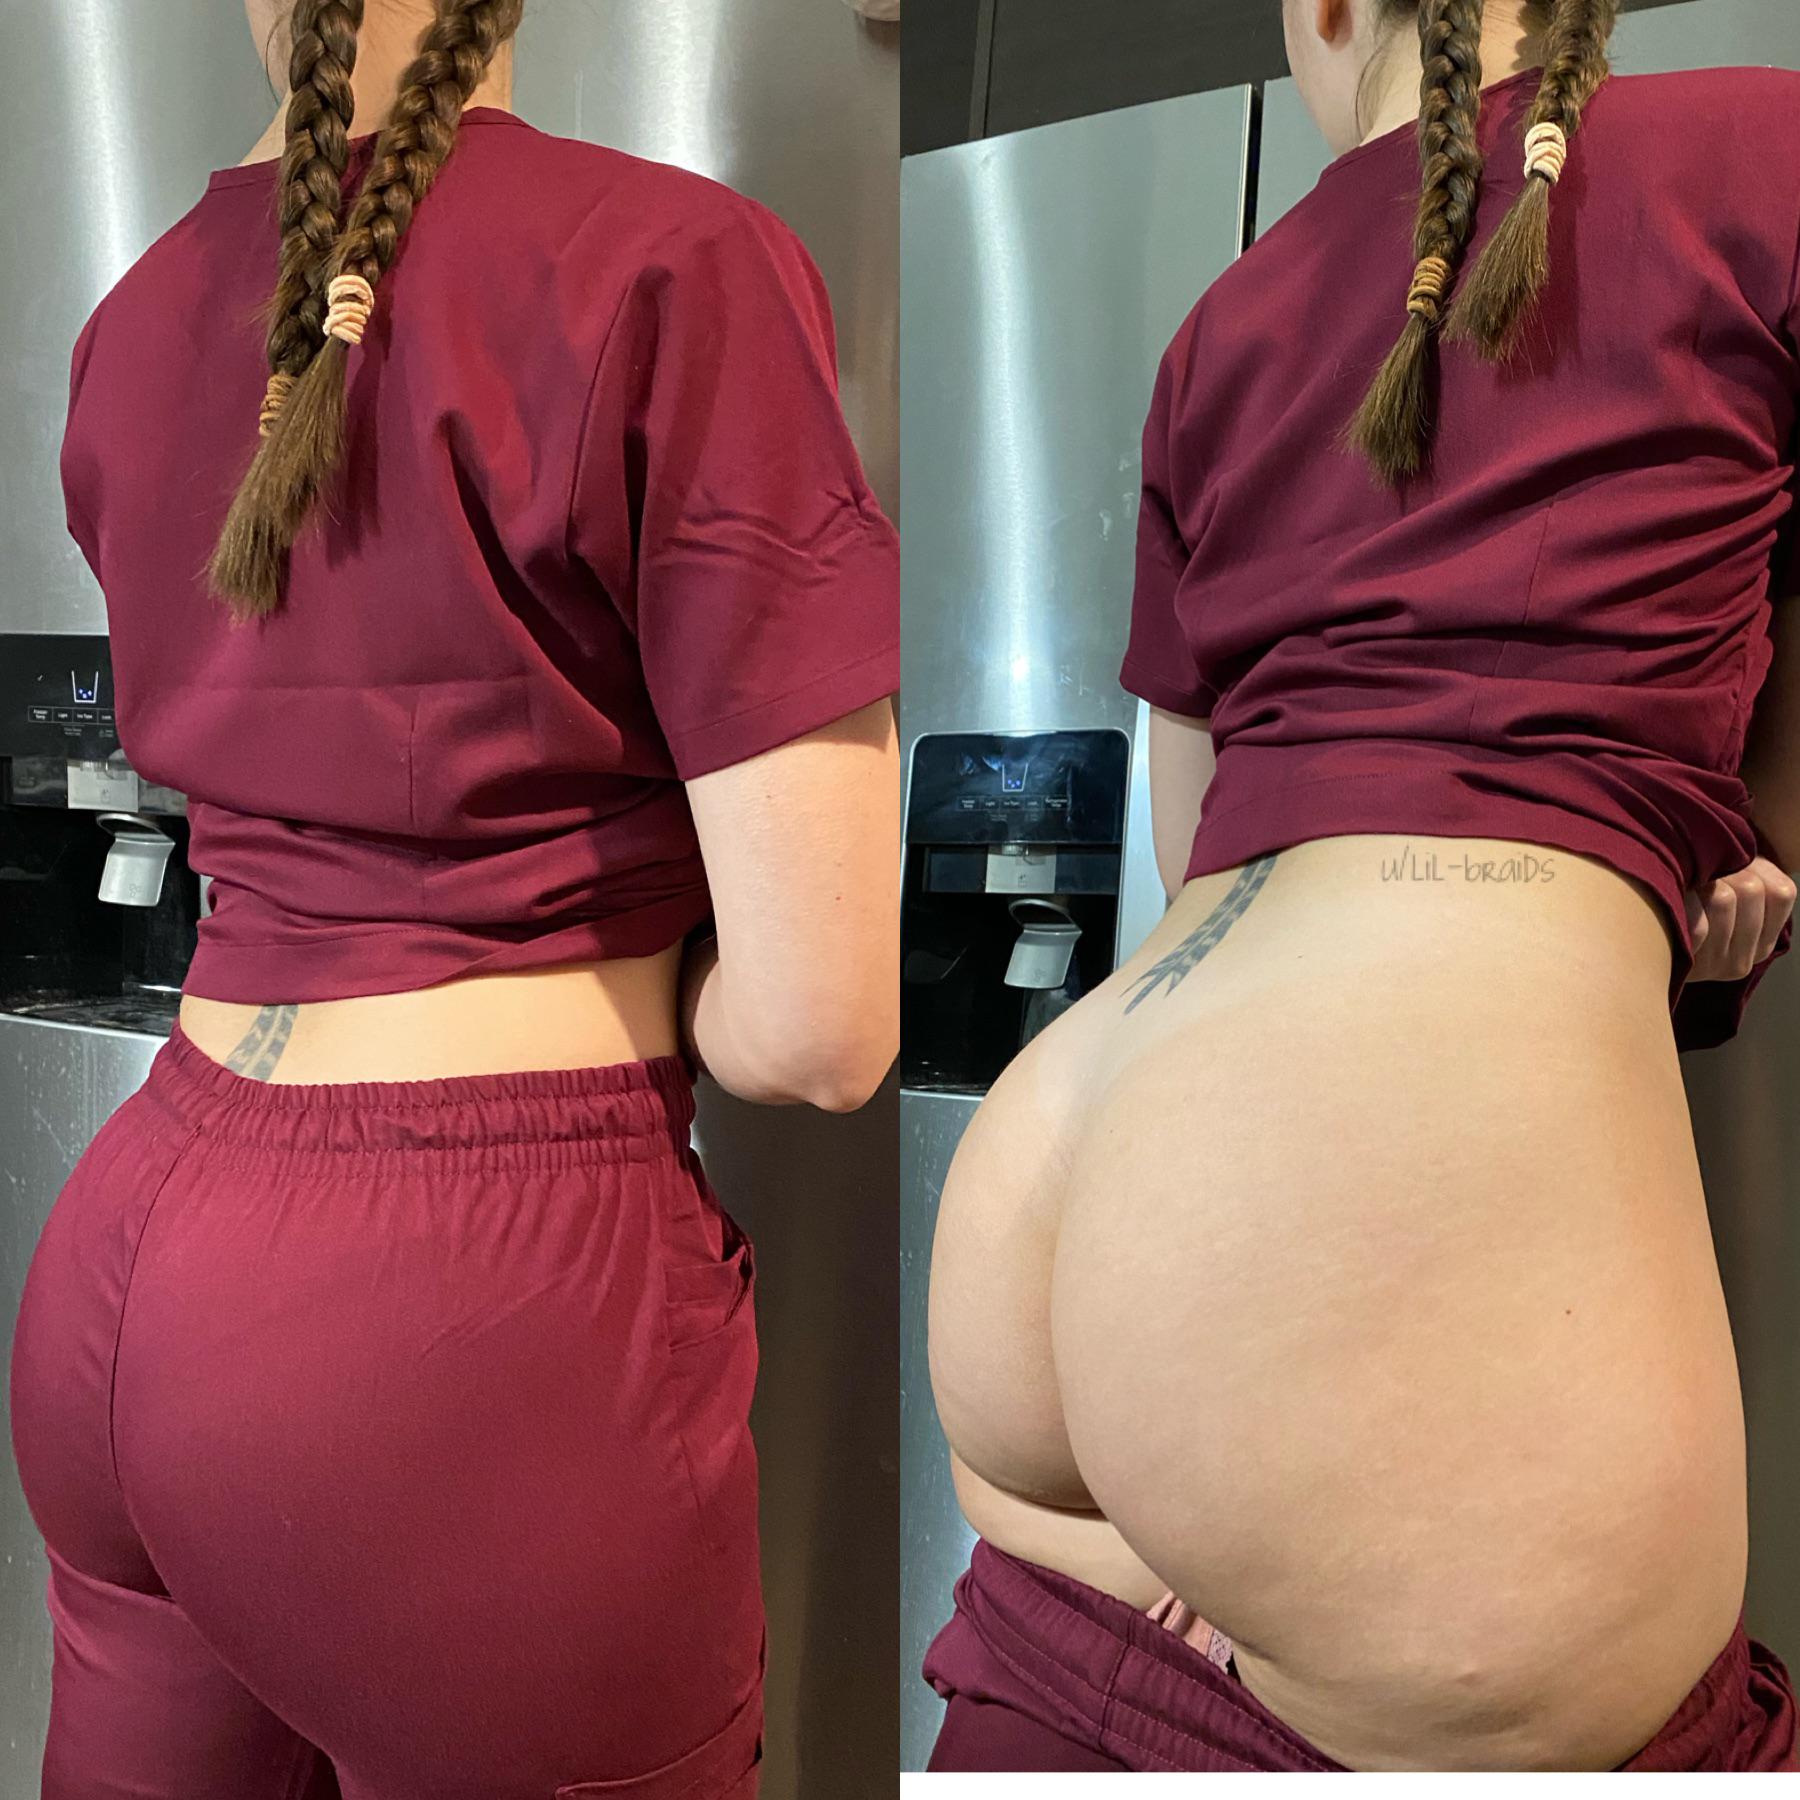 PAWG If nurse braids is coming to your rescue sit